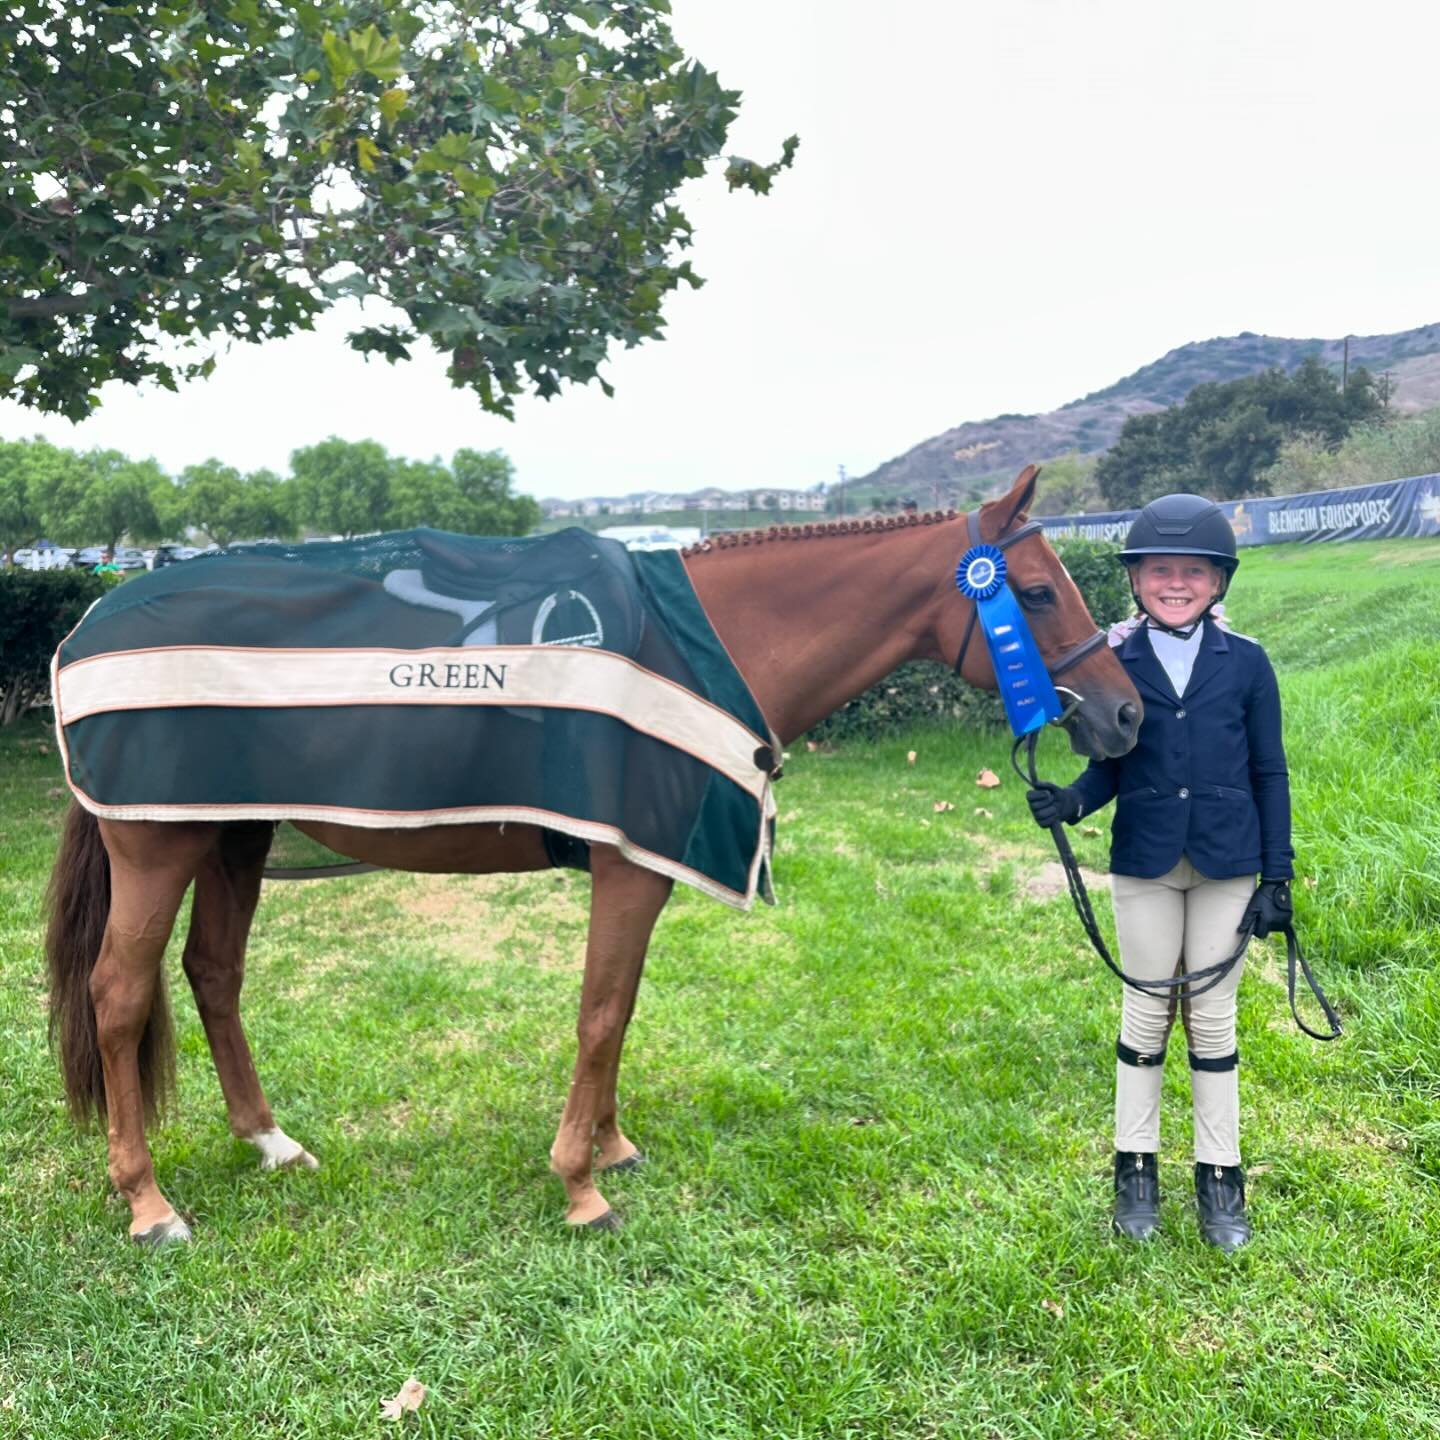 Gearing up for Devon!🔜🎡

Congratulations to these Sunnybrook riders on qualifying:

🌟Grace Green and Island Grace - Medium Pony 
🌟India Kulkin and Best Summer - Medium Pony 
🌟Grace Green and Roll Call - 5th on the waitlist for Small Ponies
🌟Ind